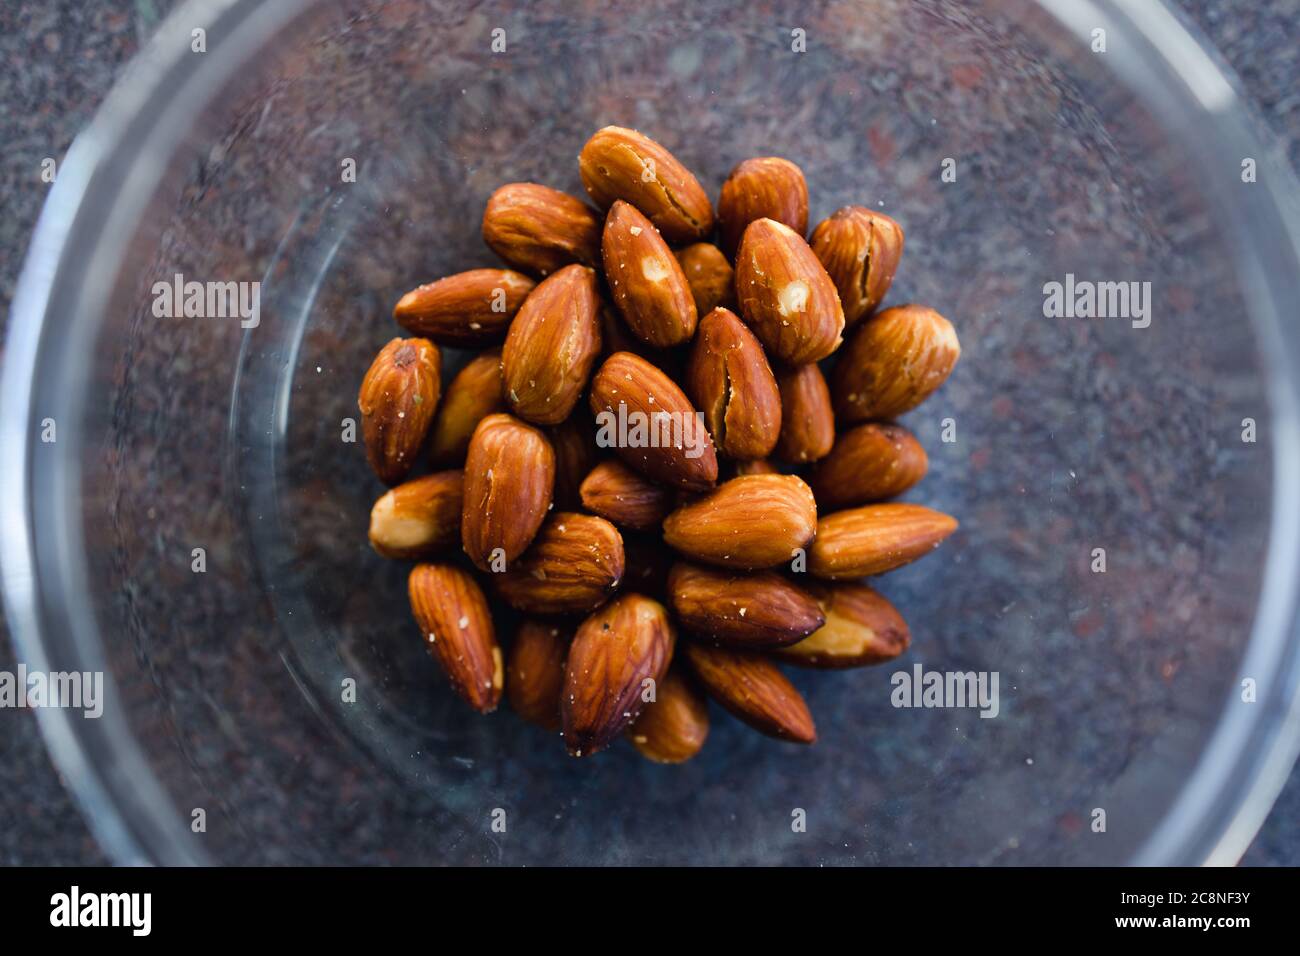 simple food ingredients concept, salted roasted almonds in clear bowl Stock Photo